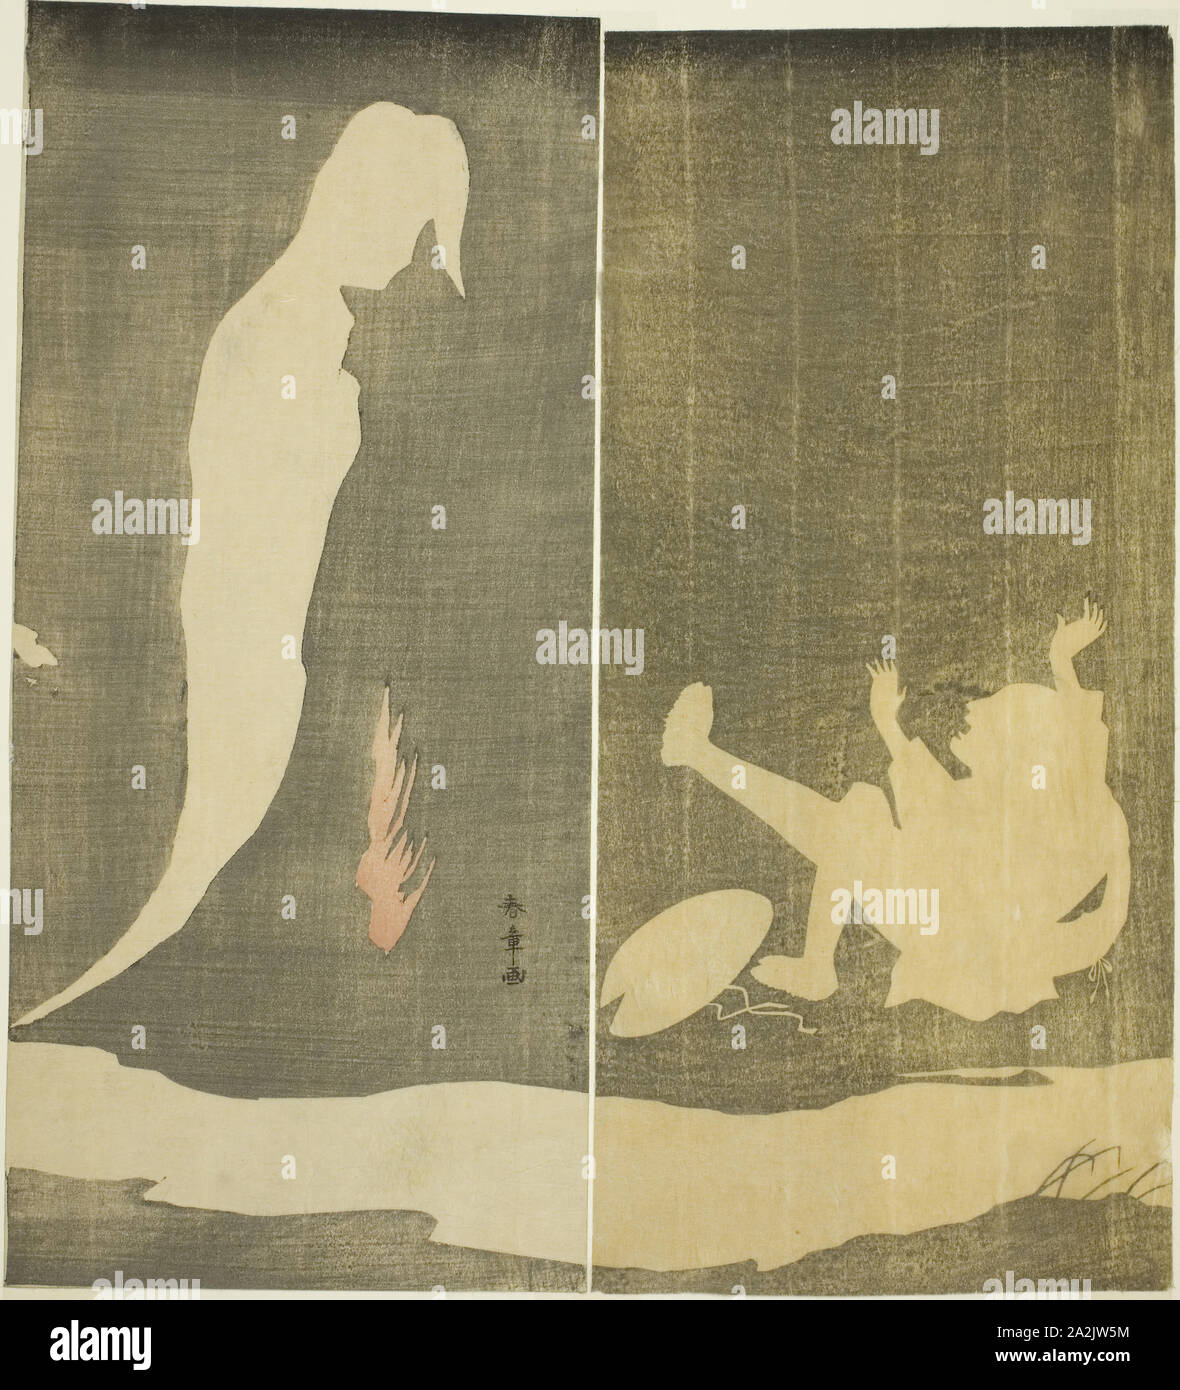 Man Falling Backward, Startled by a Woman’s Ghost over a River, c. 1782, Katsukawa Shunsho 勝川 春章, Japanese, 1726-1792, Japan, Color woodblock print, hosoban diptych, Right: 31.5 x 14.2 cm (12 3/8 x 5 9/16 in.), left: 31.7 x 14.2 cm (12 1/2 x 5 9/16 in Stock Photo